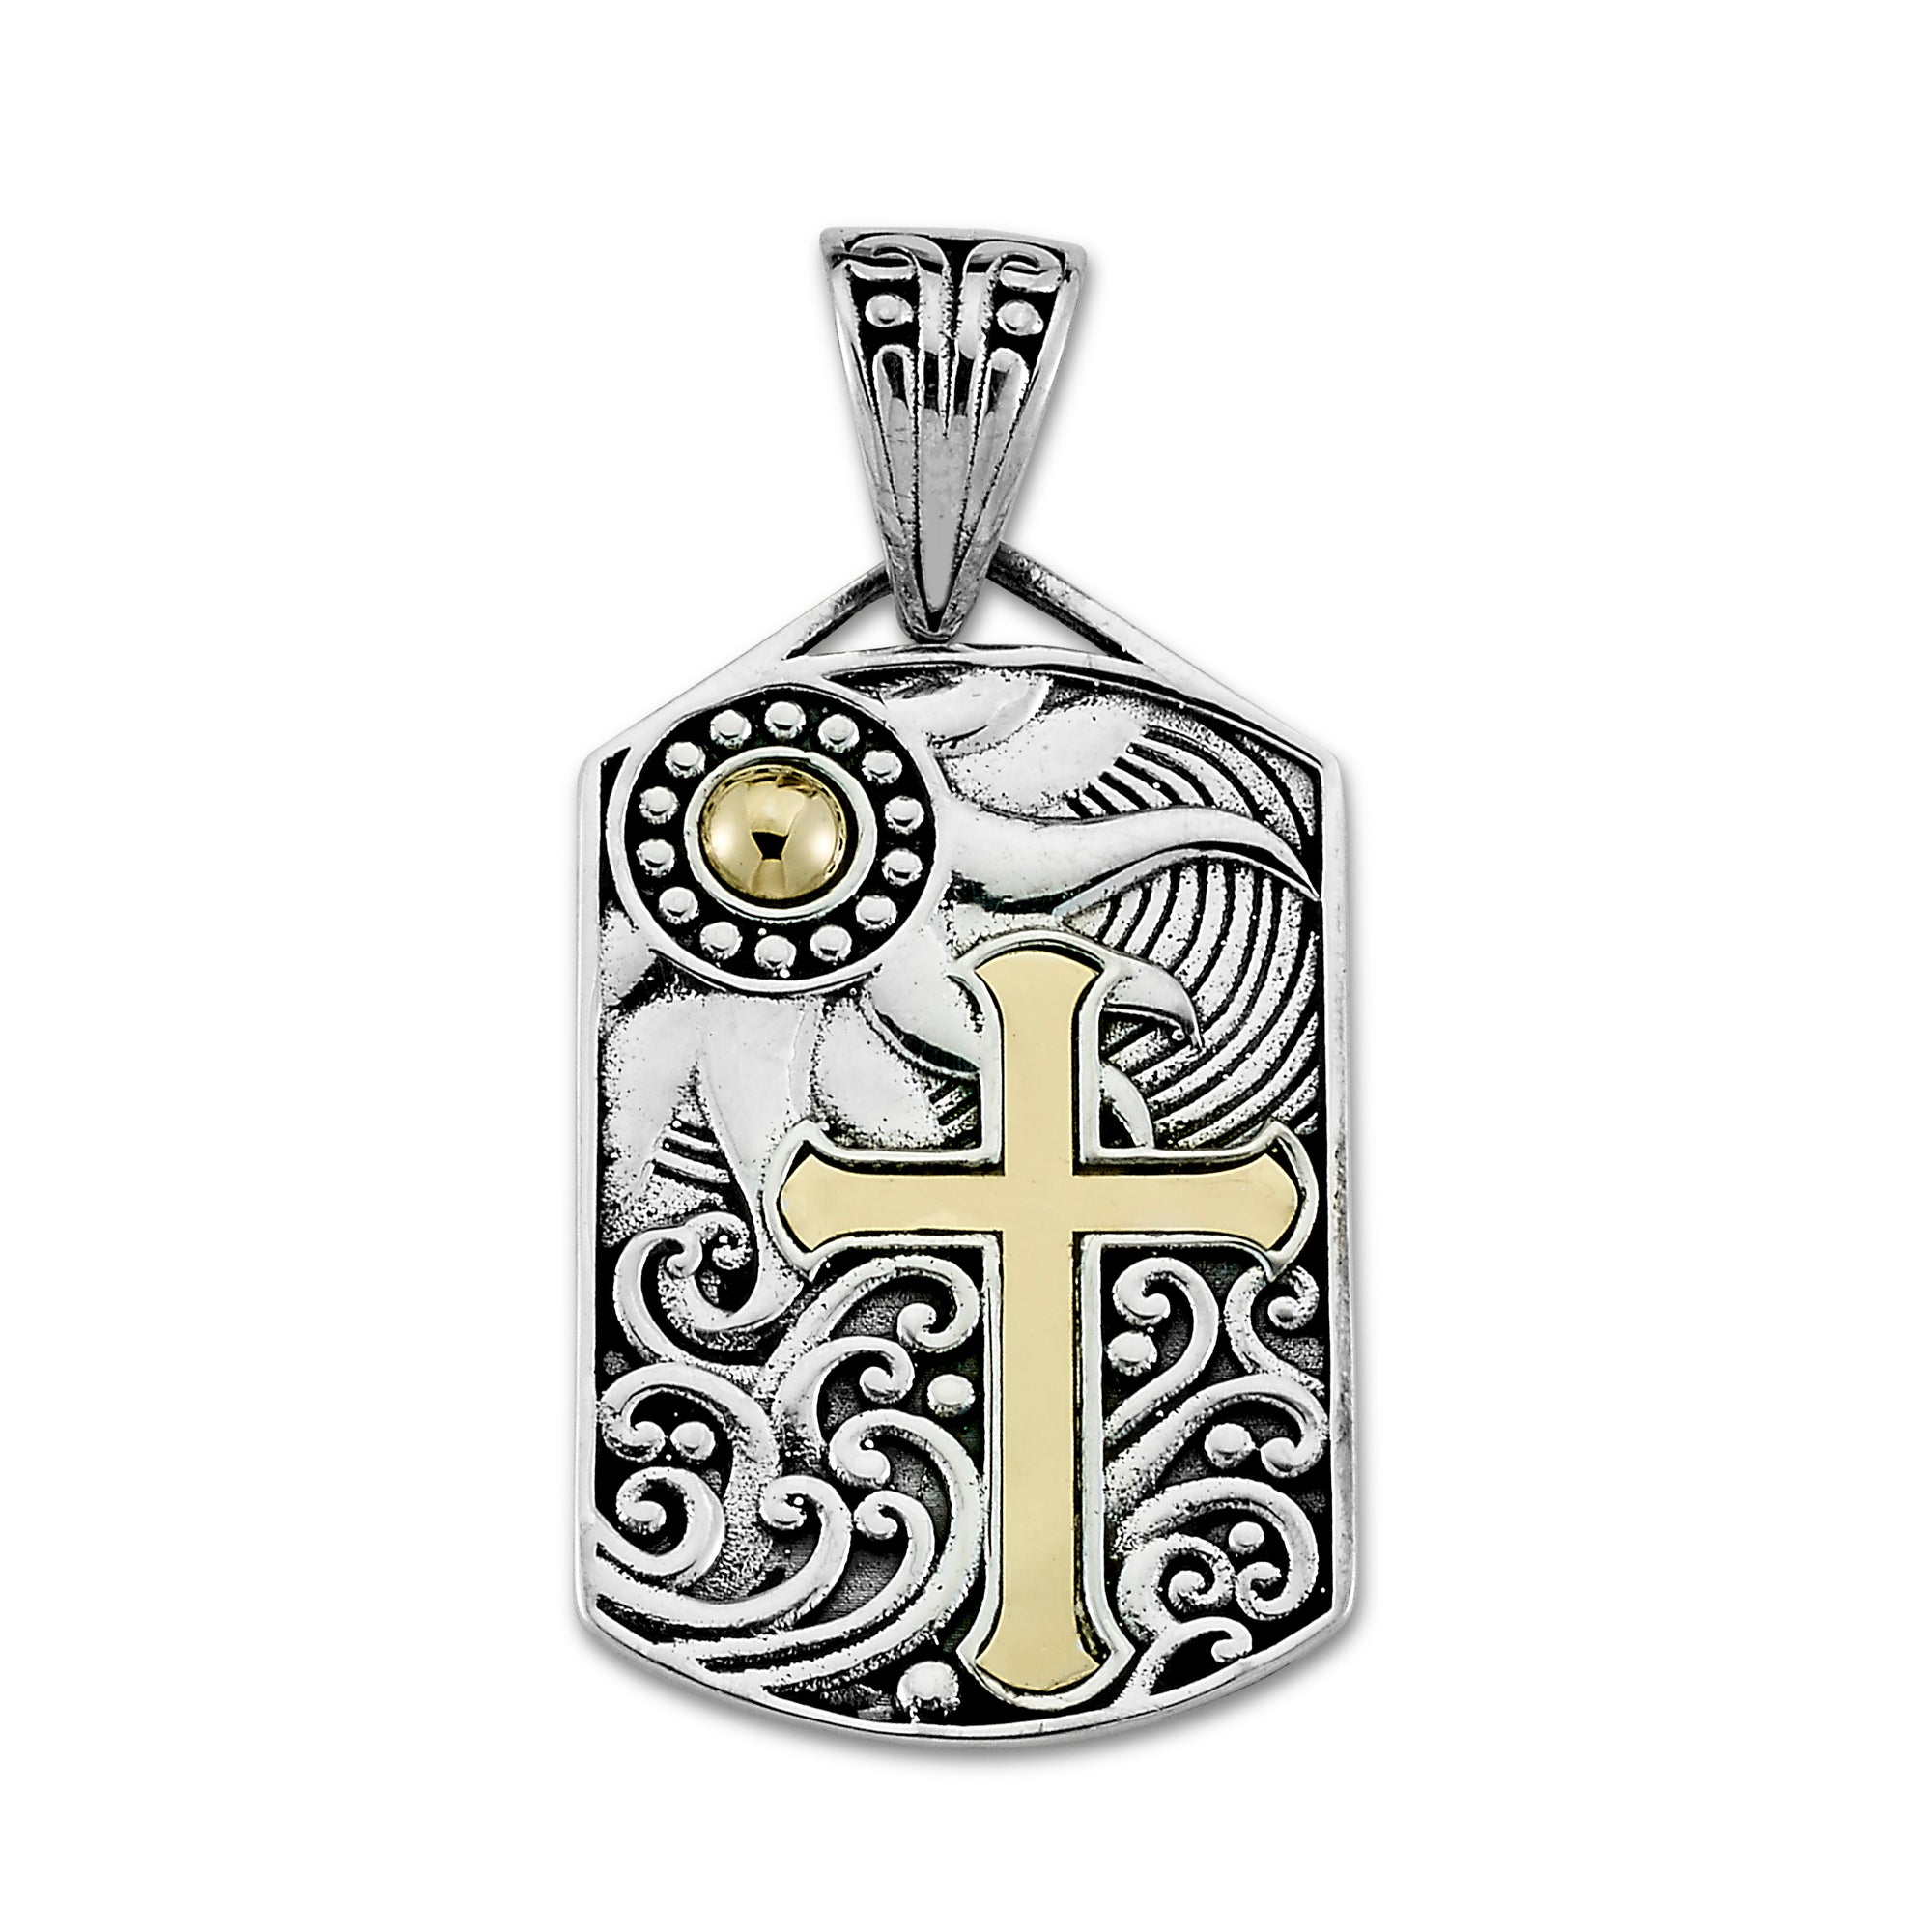 Solstice Cross Pendant available at Talisman Collection Fine Jewelers in El Dorado Hills, CA and online. Specs: Solstice Cross Pendant depicting the Sun and Sea in this Sterling Silver and 18k gold dog tag pendant. 